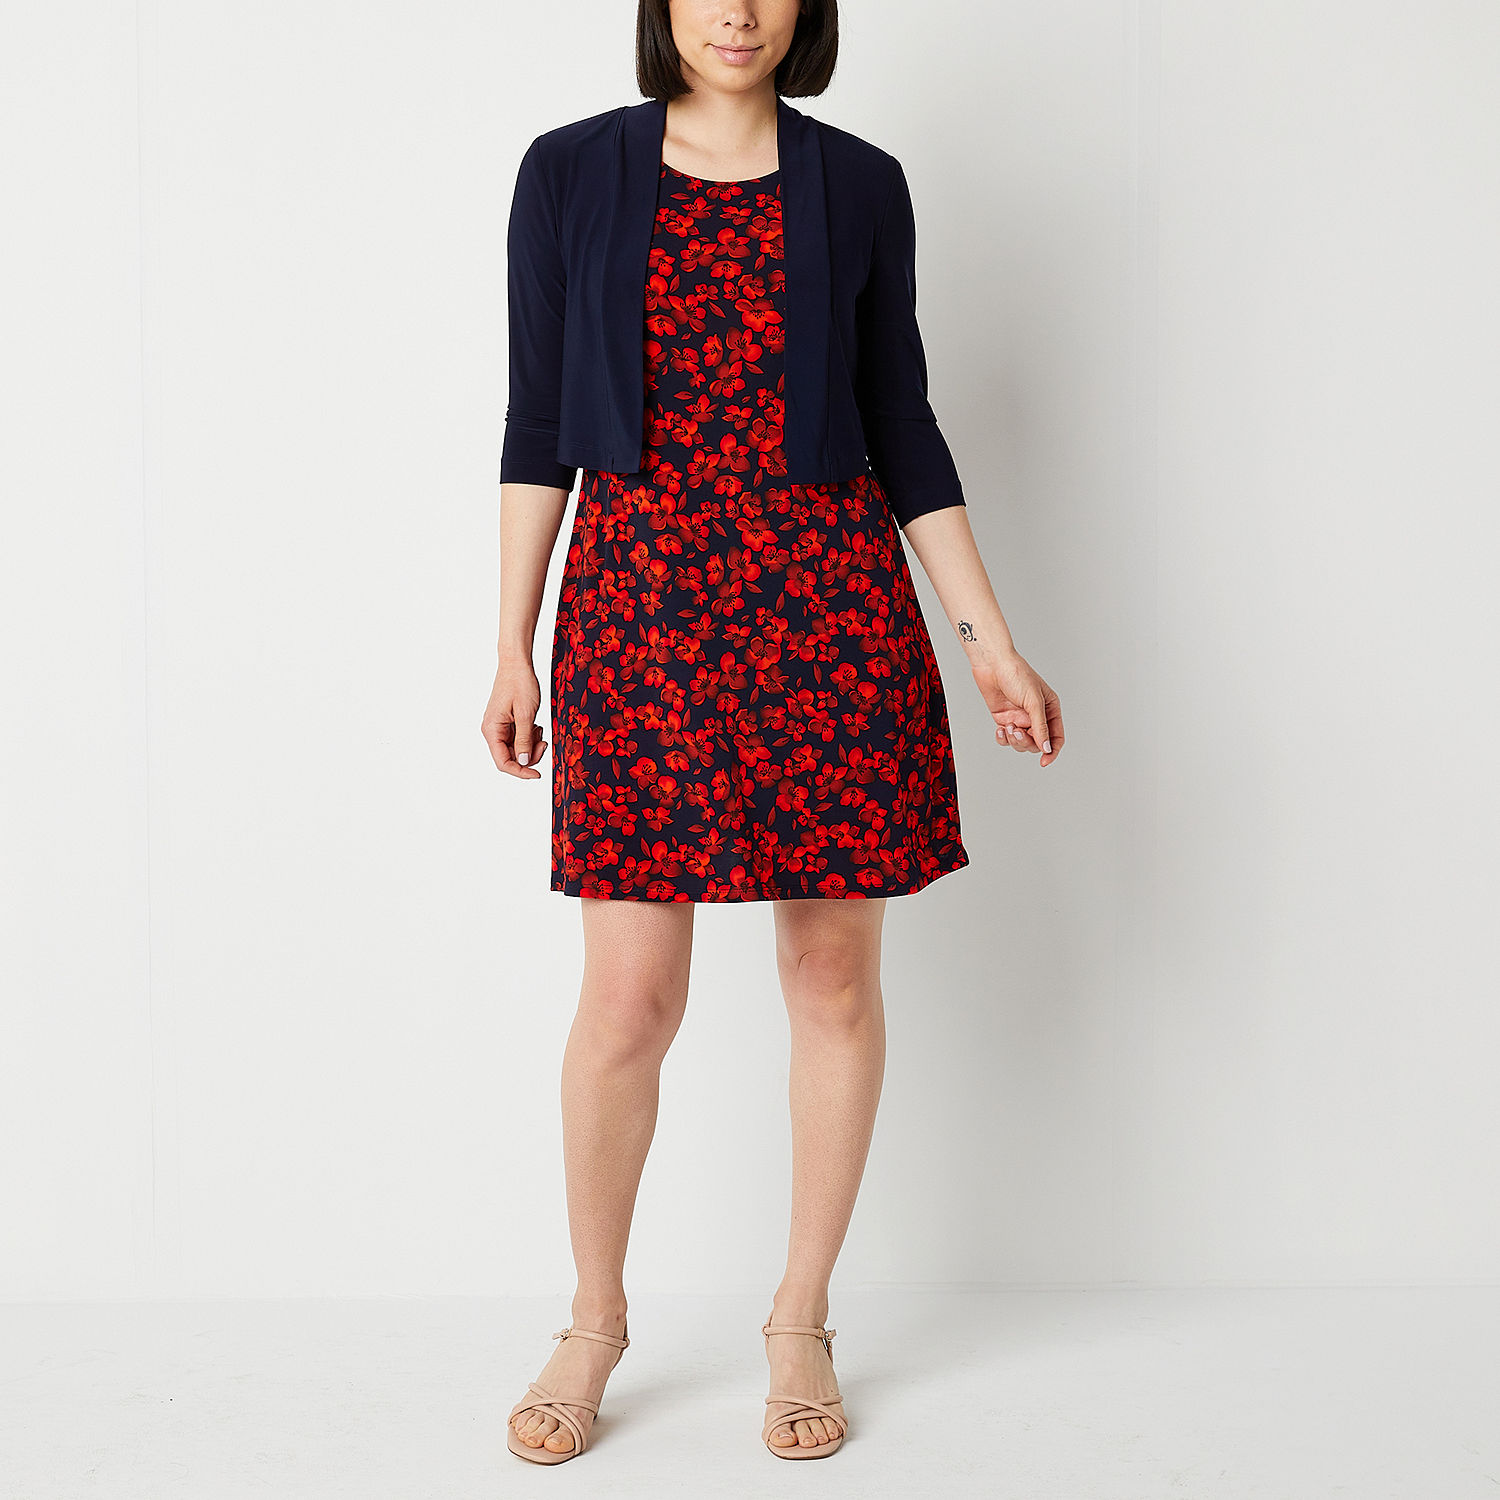 Perceptions Petite Jacket Dress, Color: Navy Red - JCPenney